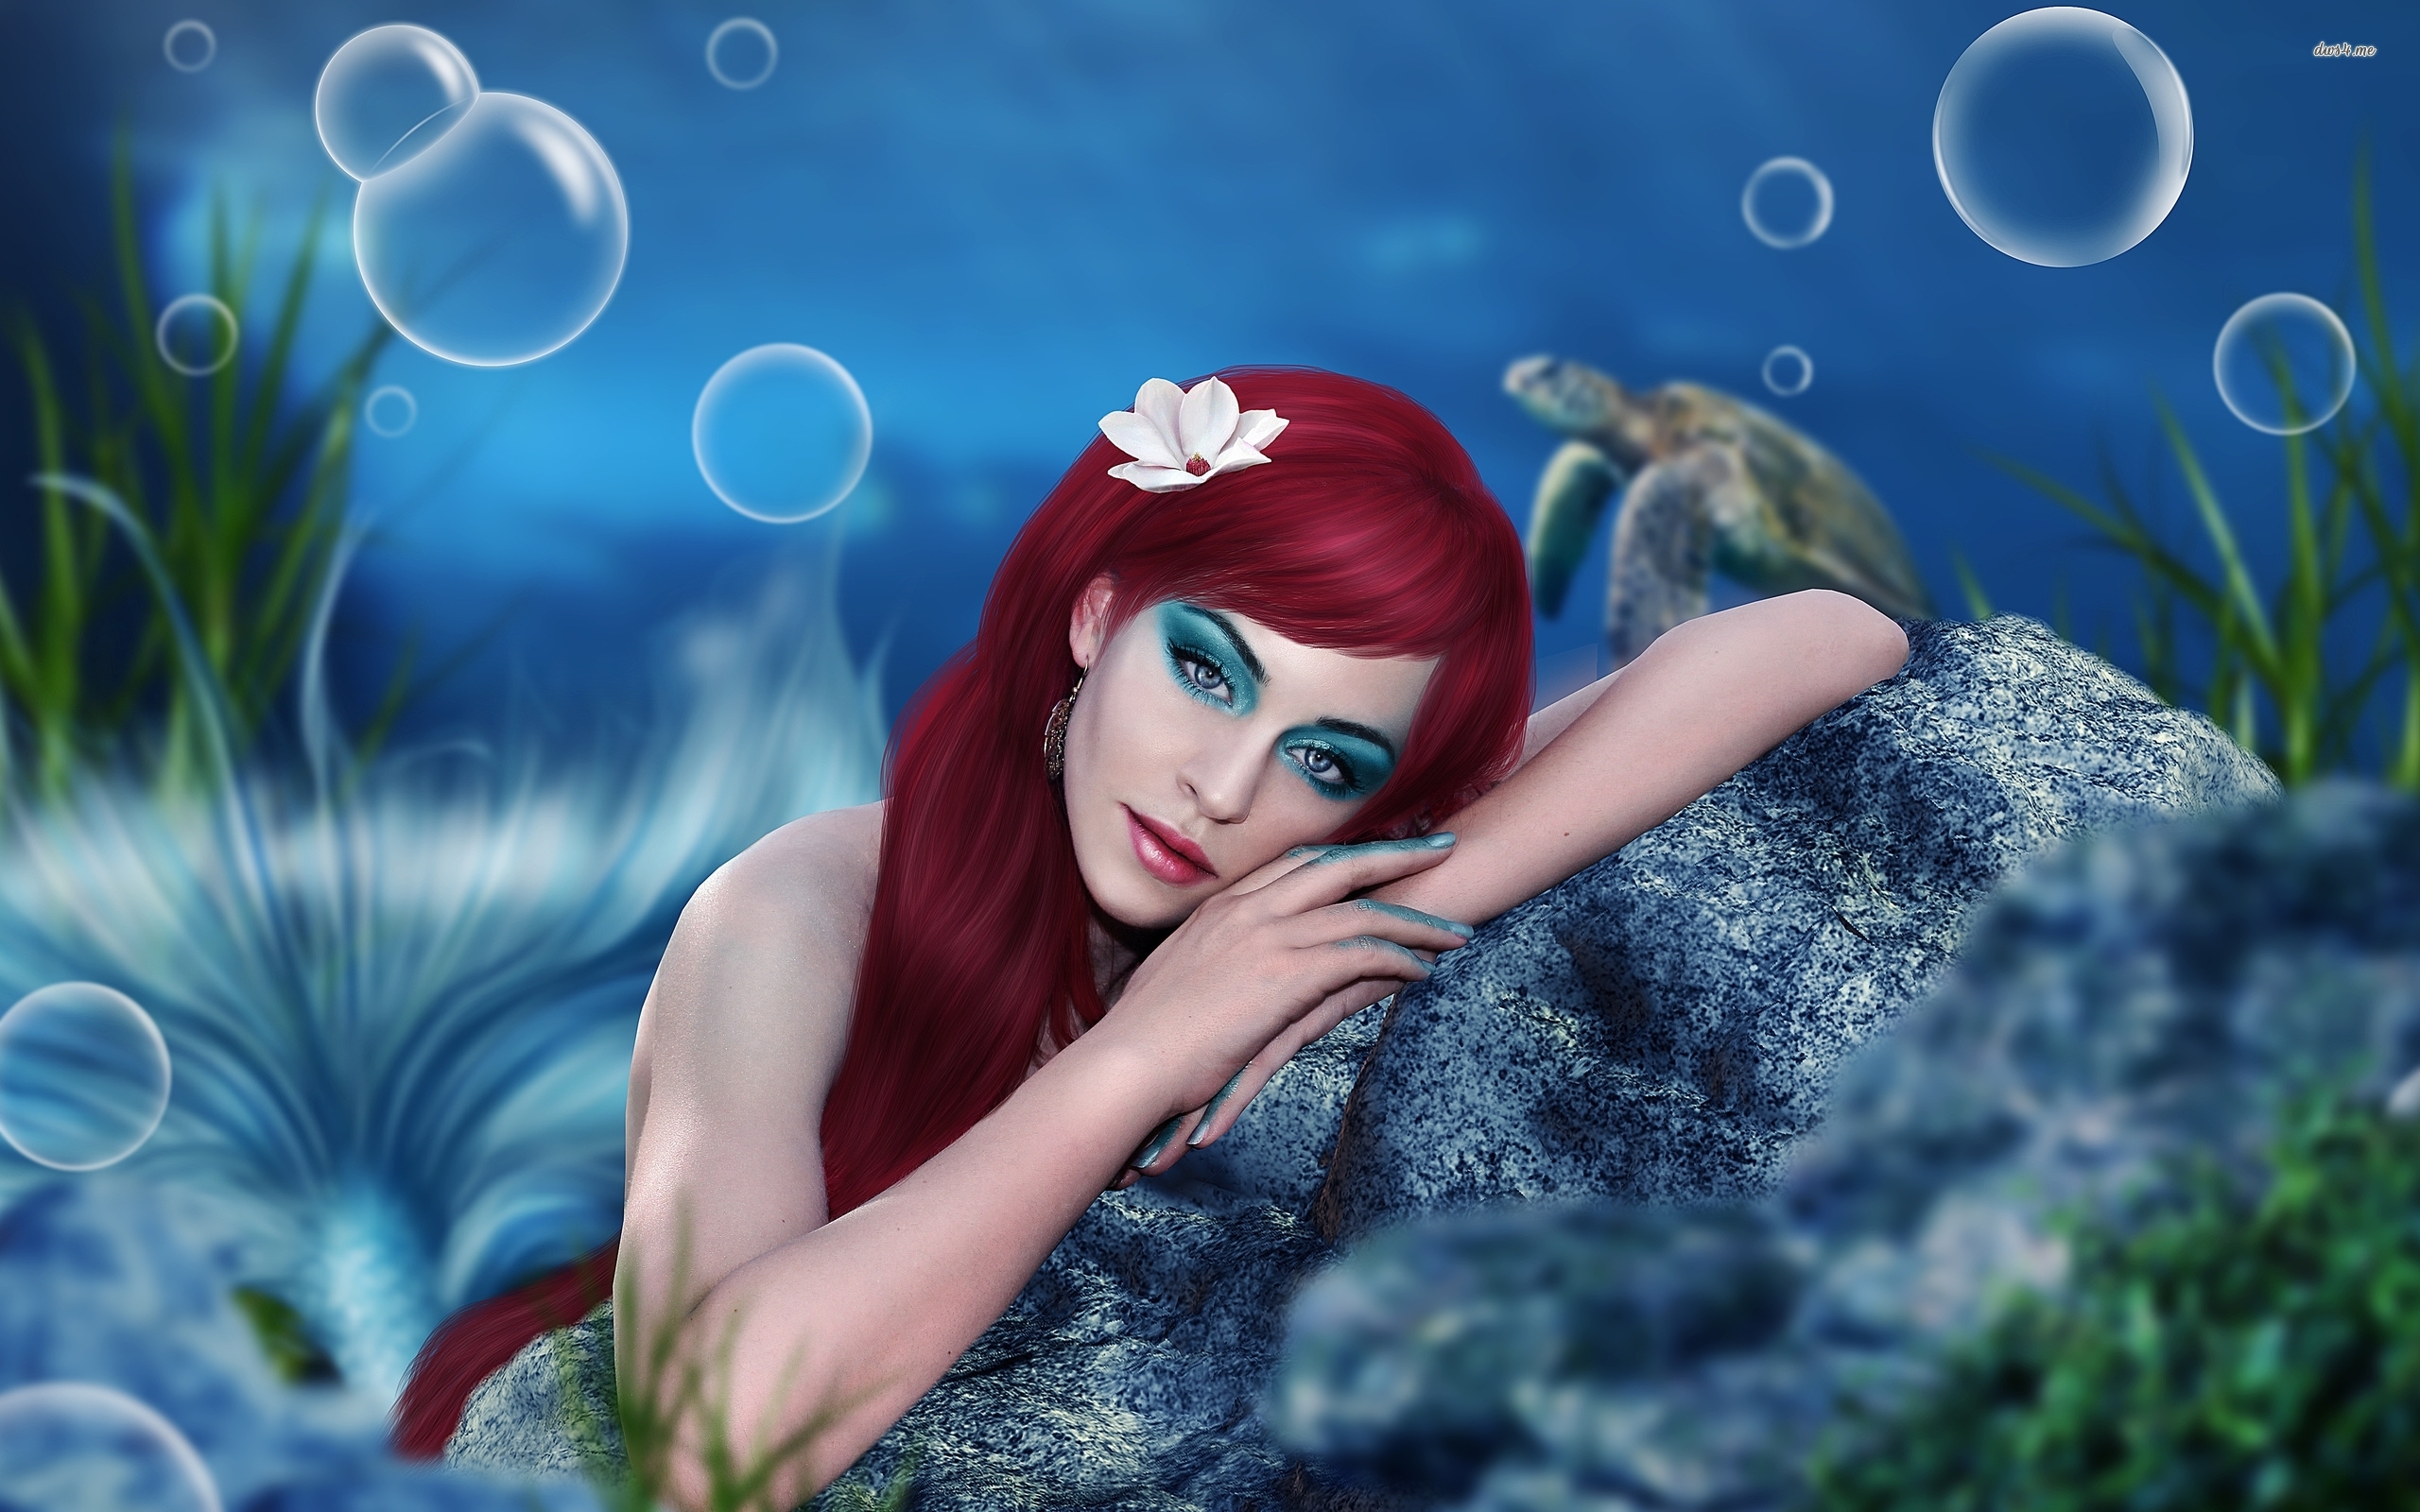 Download Mermaid wallpapers for mobile phone free Mermaid HD pictures